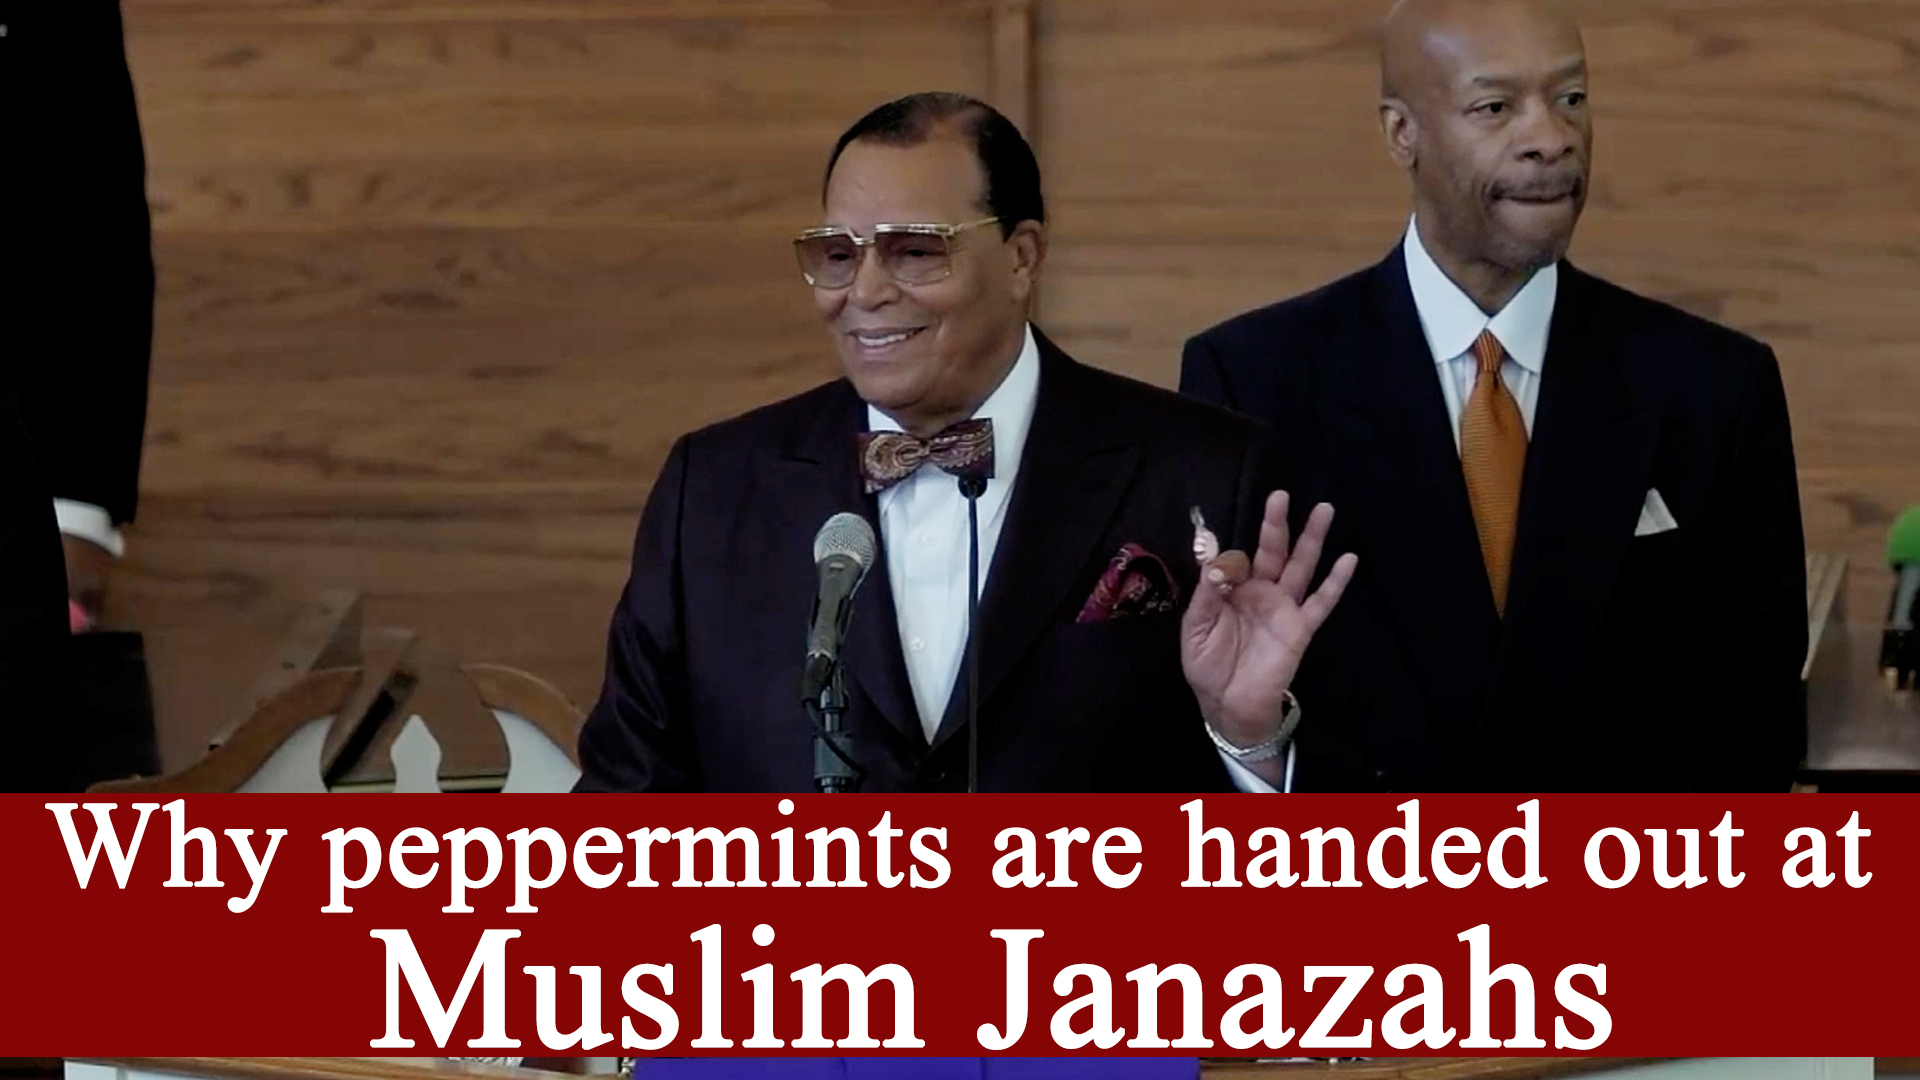 The Significance of Peppermints handed out at Muslim Janazahs